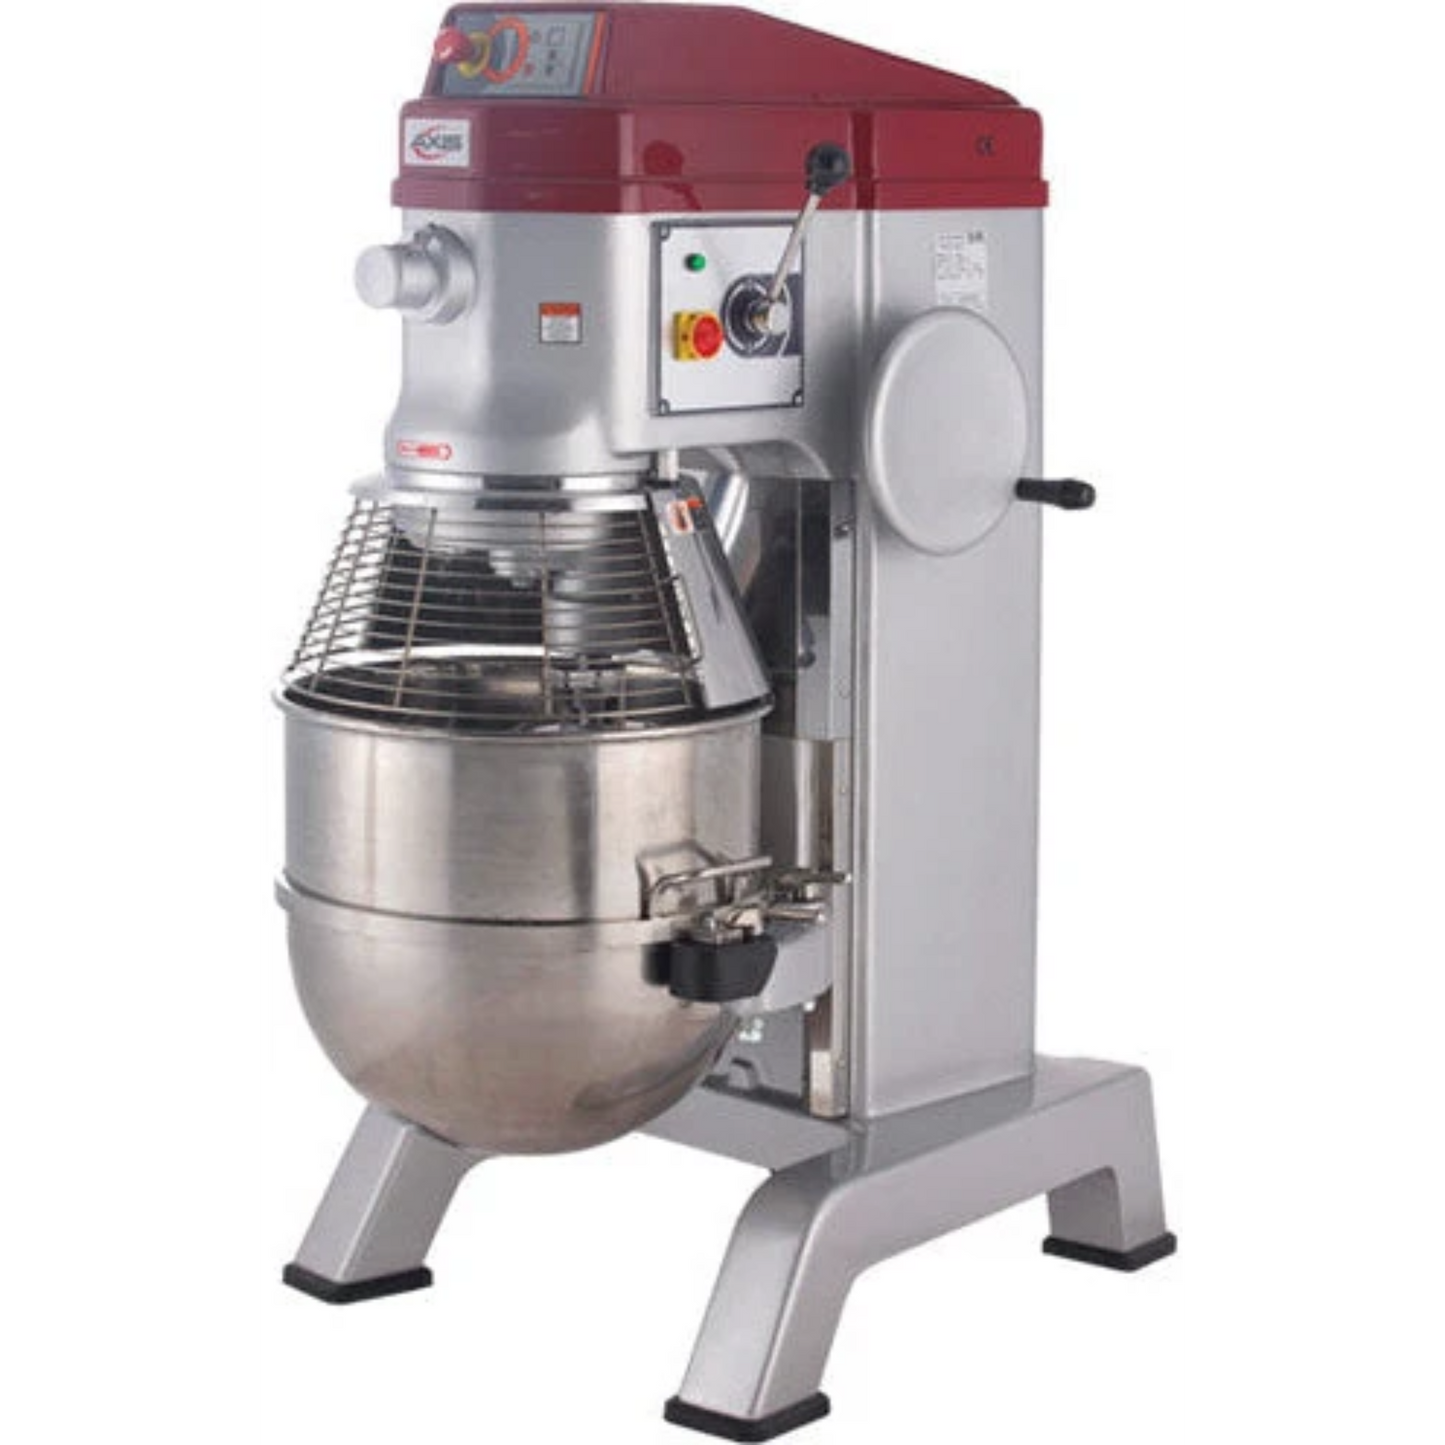 Axis AX-M60P Floor Model 60 Quart Planetary Mixer with Timer, 3-Speed, 3 HP